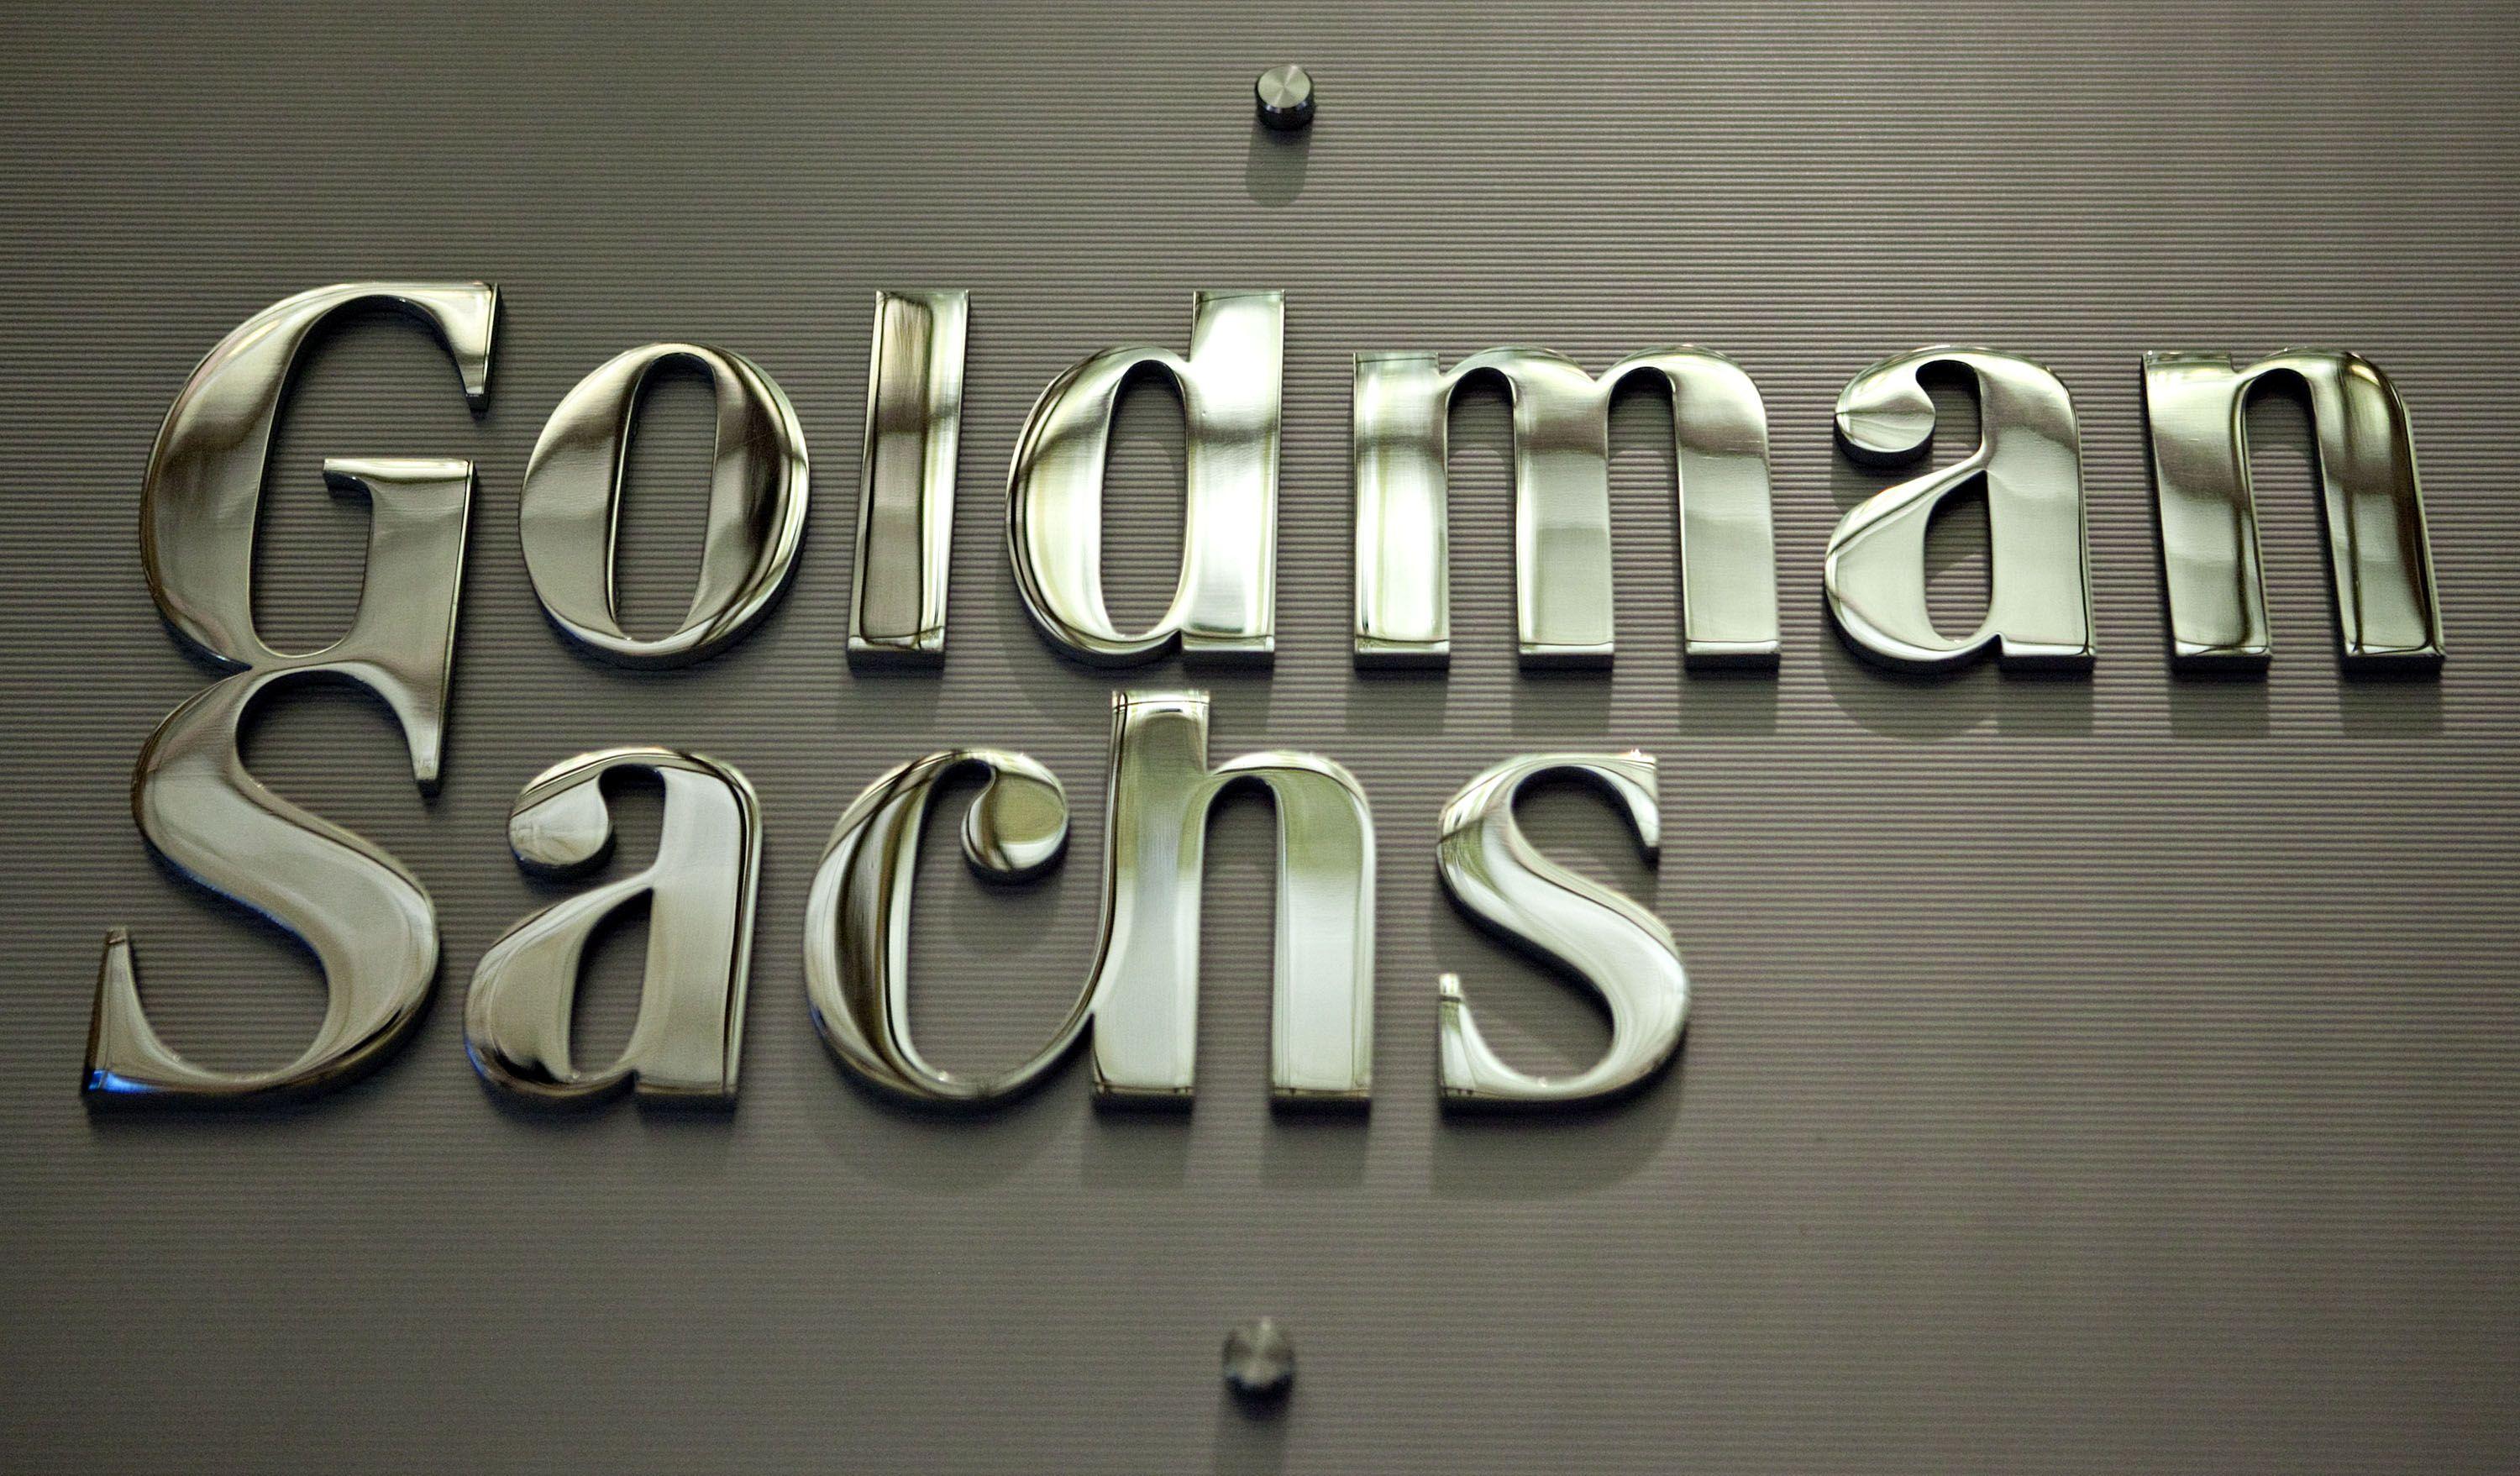 Goldman Sachs Logo - Goldman Sachs Is Eyeing This City for a Post-Brexit Move From London ...